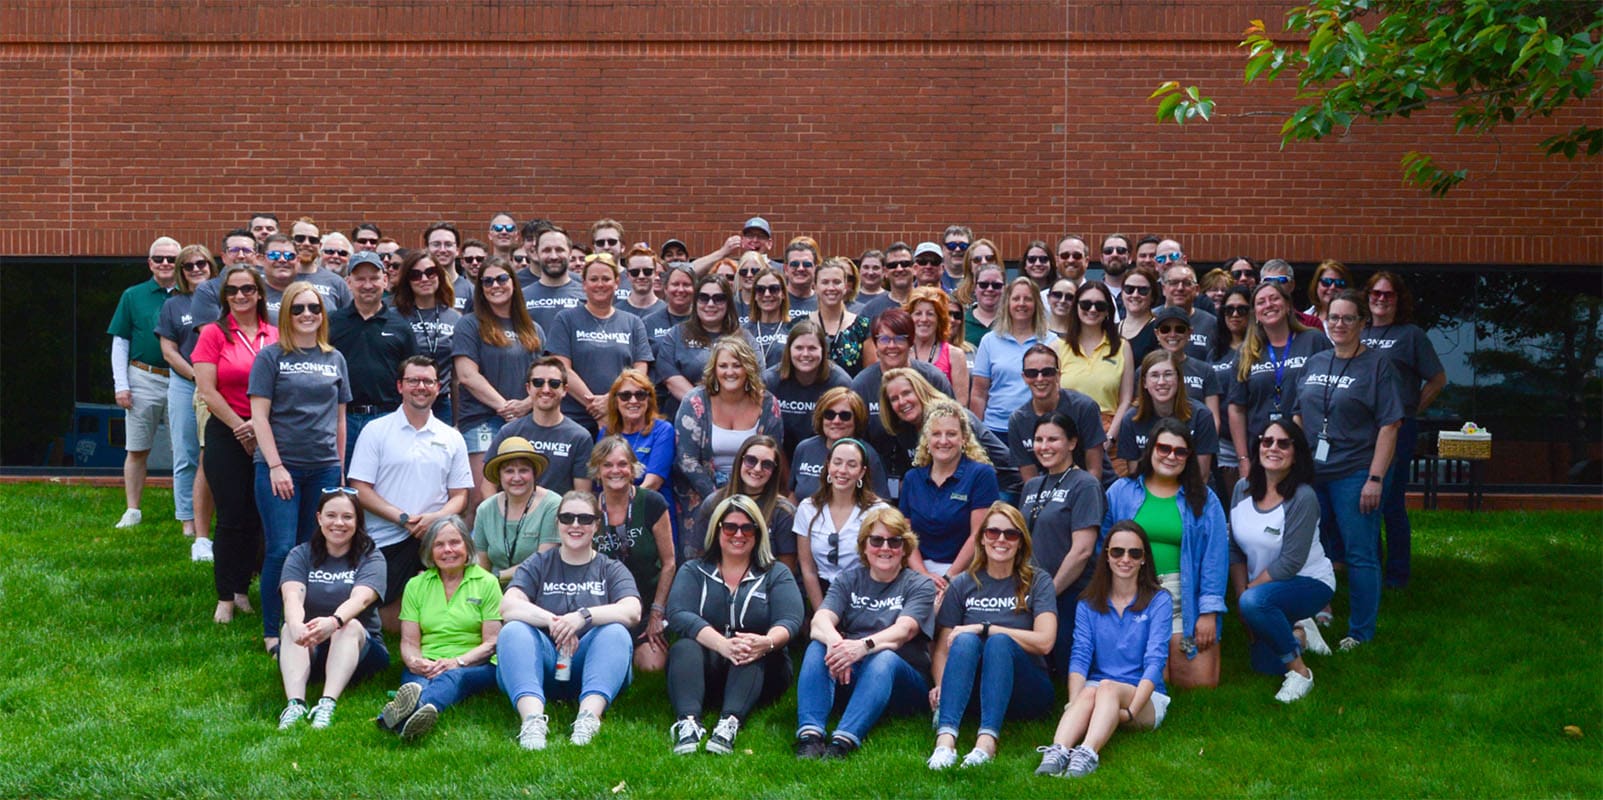 Careers - Portrait of Large Group of Smiling McConkey Employees Standing and Sitting on the Green Grass Outside the McConkey Building on a Sunny Day